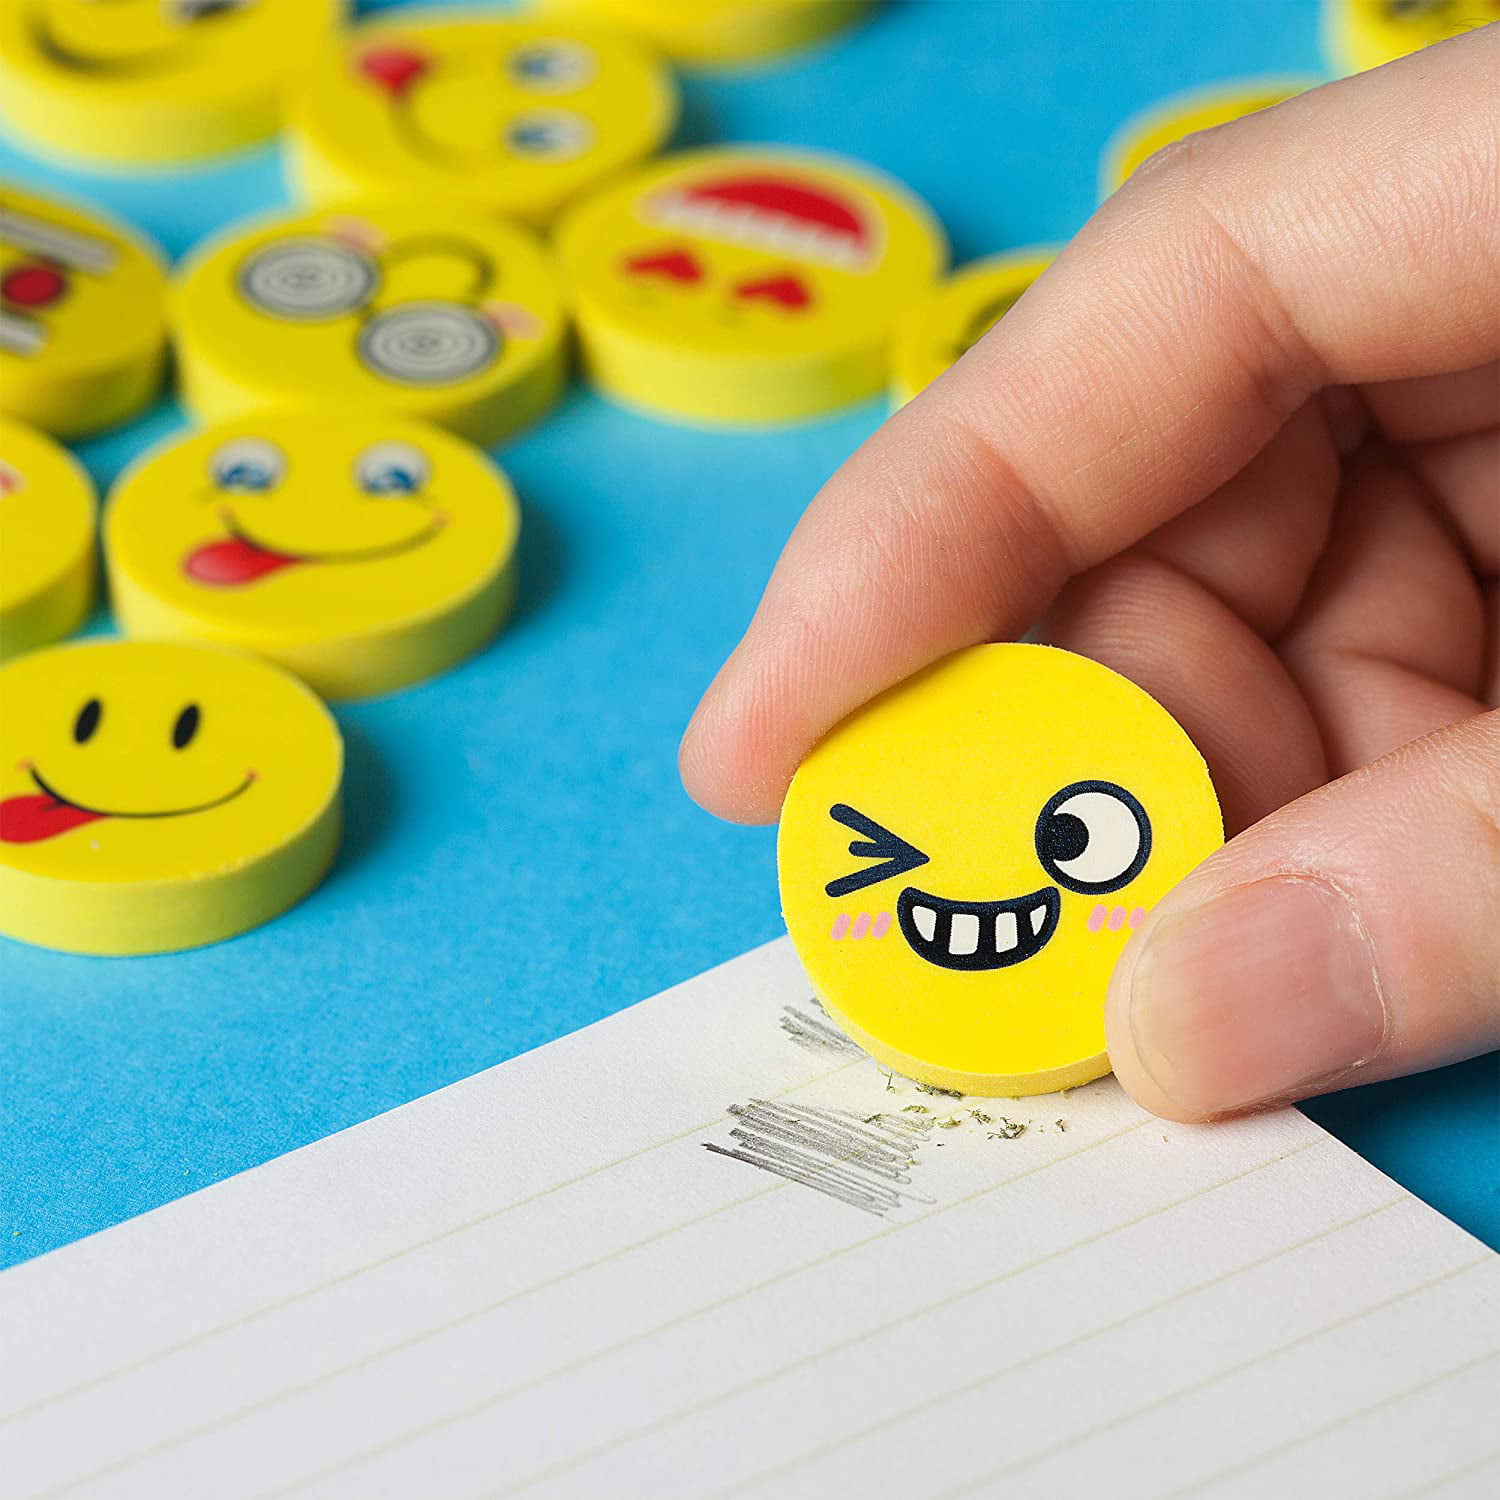 SPADORIVE 144 PCS Cute Friendly Emoji Faces Erasers for Kids-Funny Multiple Emoticon Faces for Class Party in Holidays 36 Packs of 4 assorted designs 